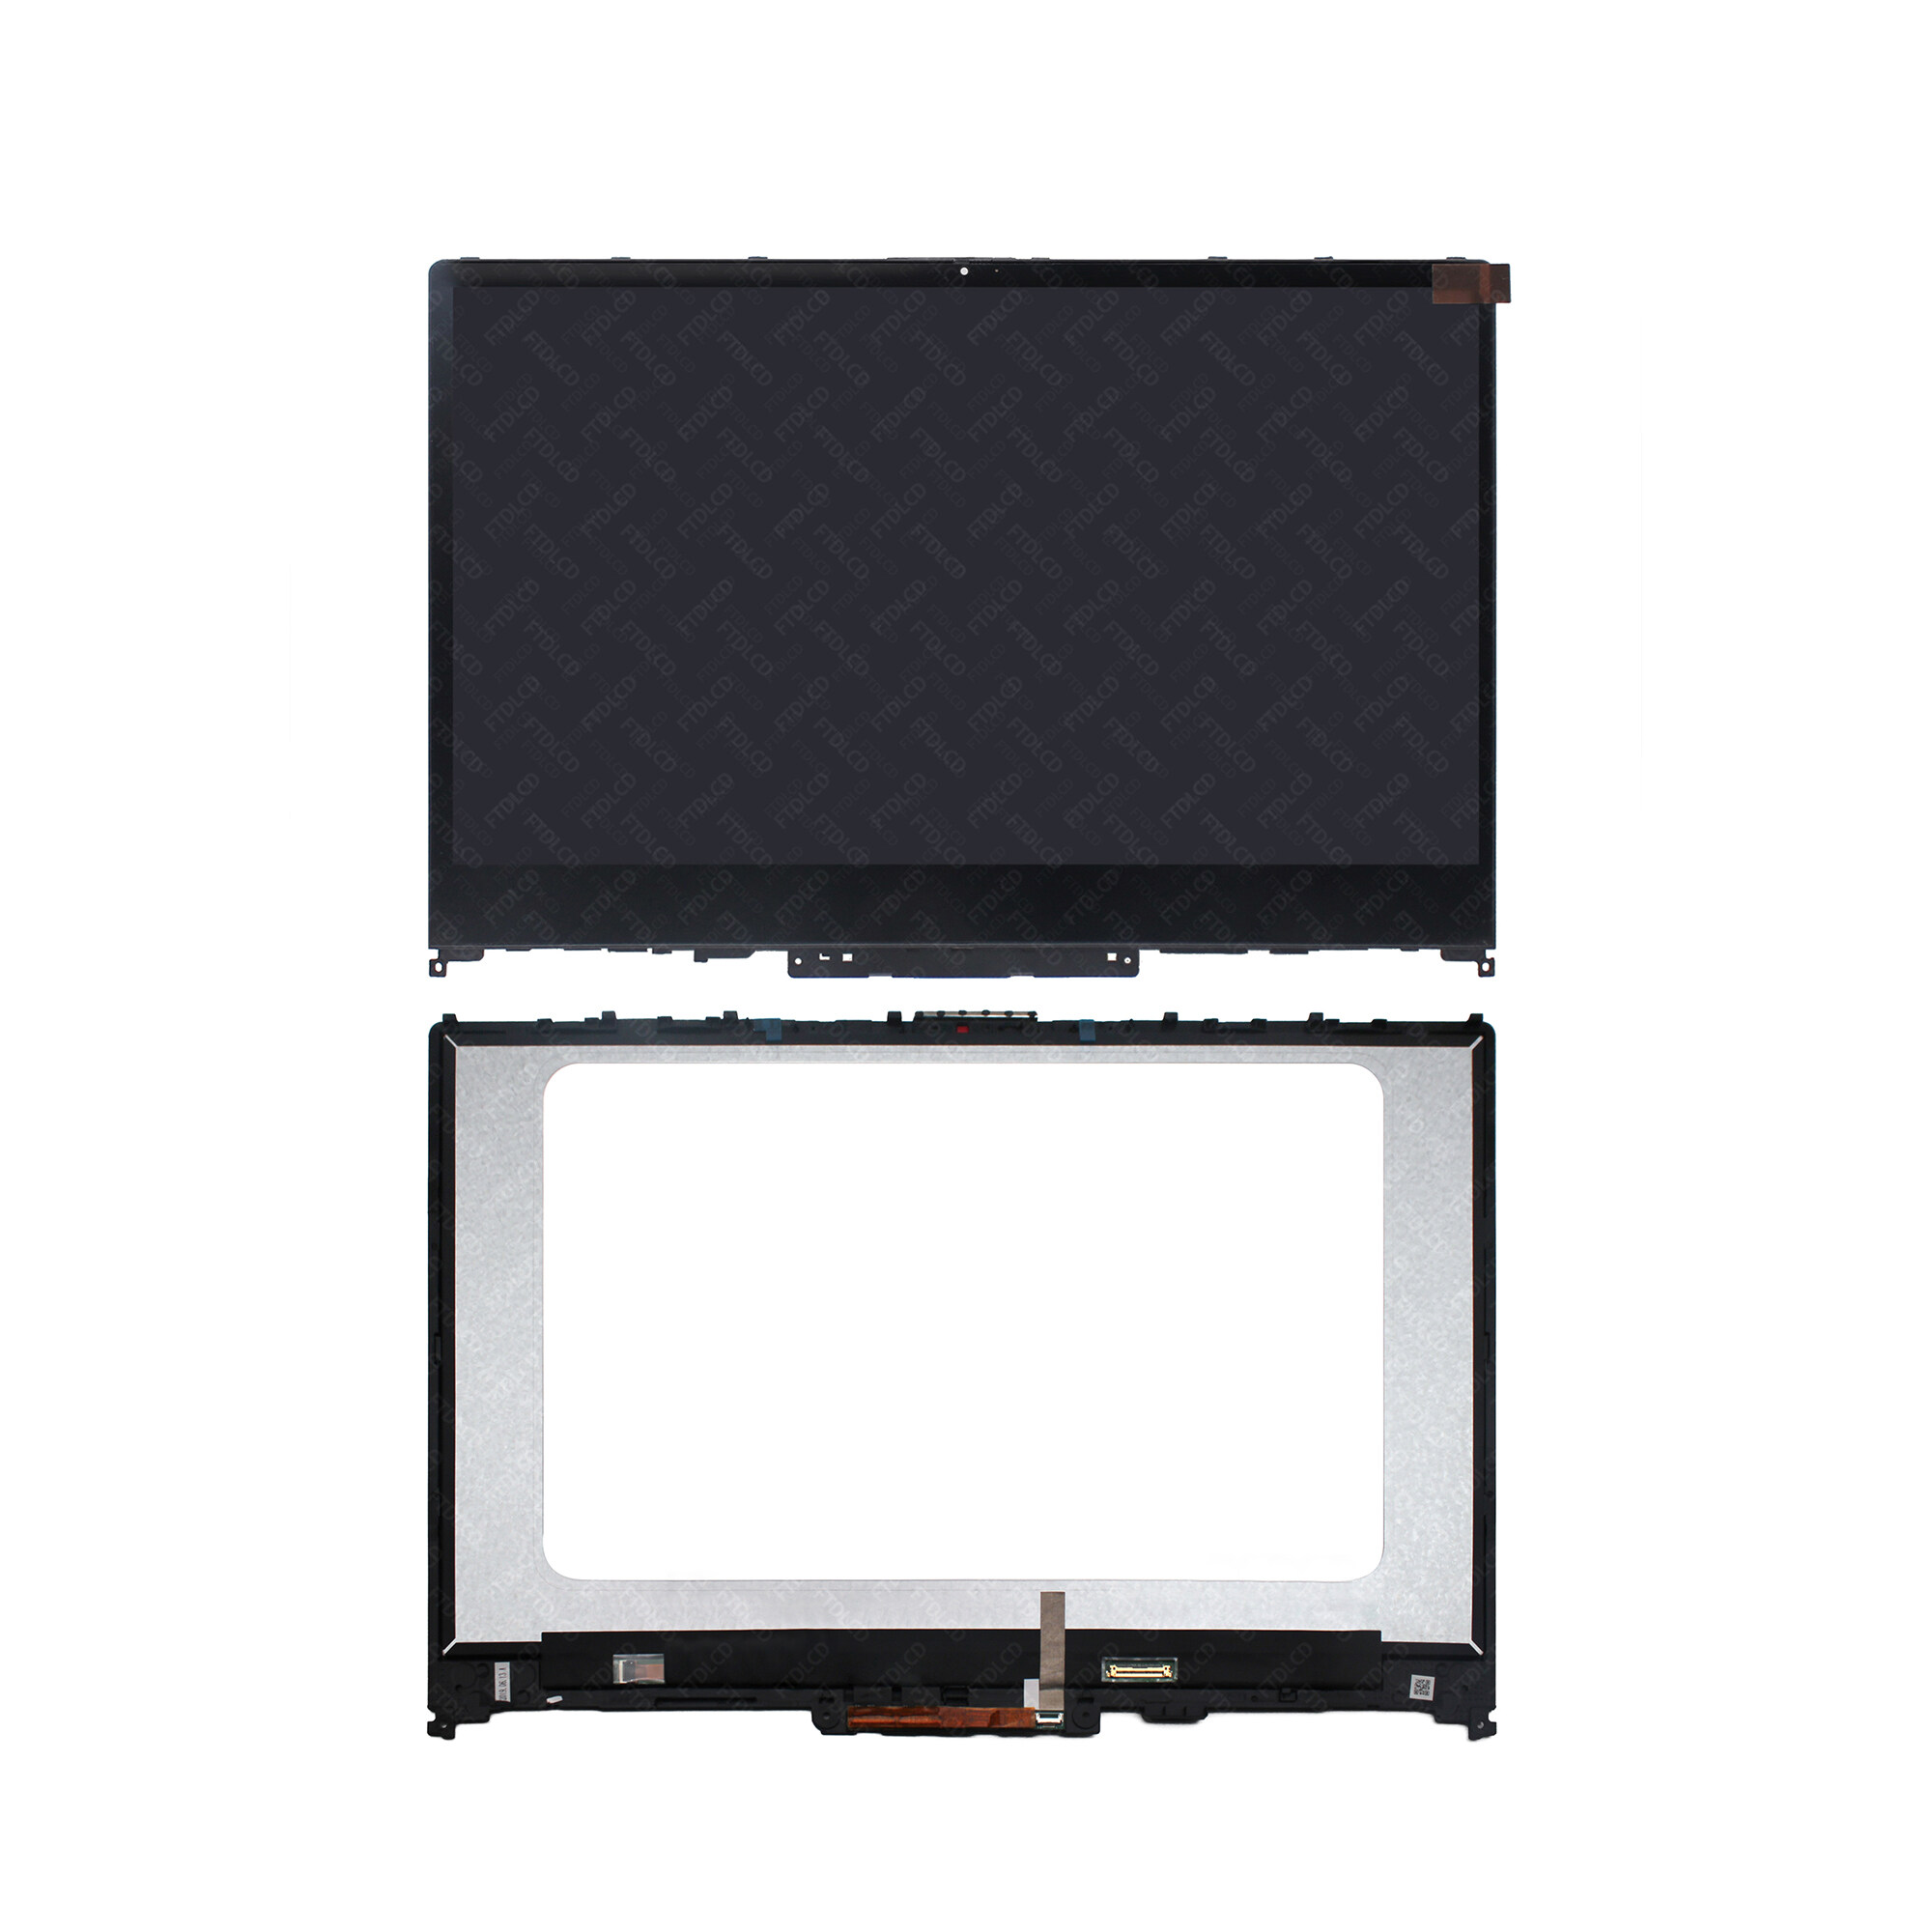 Kreplacement Replacement 15.6 inches FullHD 1080P IPS LED LCD Panel Touch Screen Digitizer Assembly Bezel with Touch Control Board for Lenovo Ideapad Flex-15 Flex-15IWL Flex-15IML Flex-15IIL 81SR 81XH 81XK